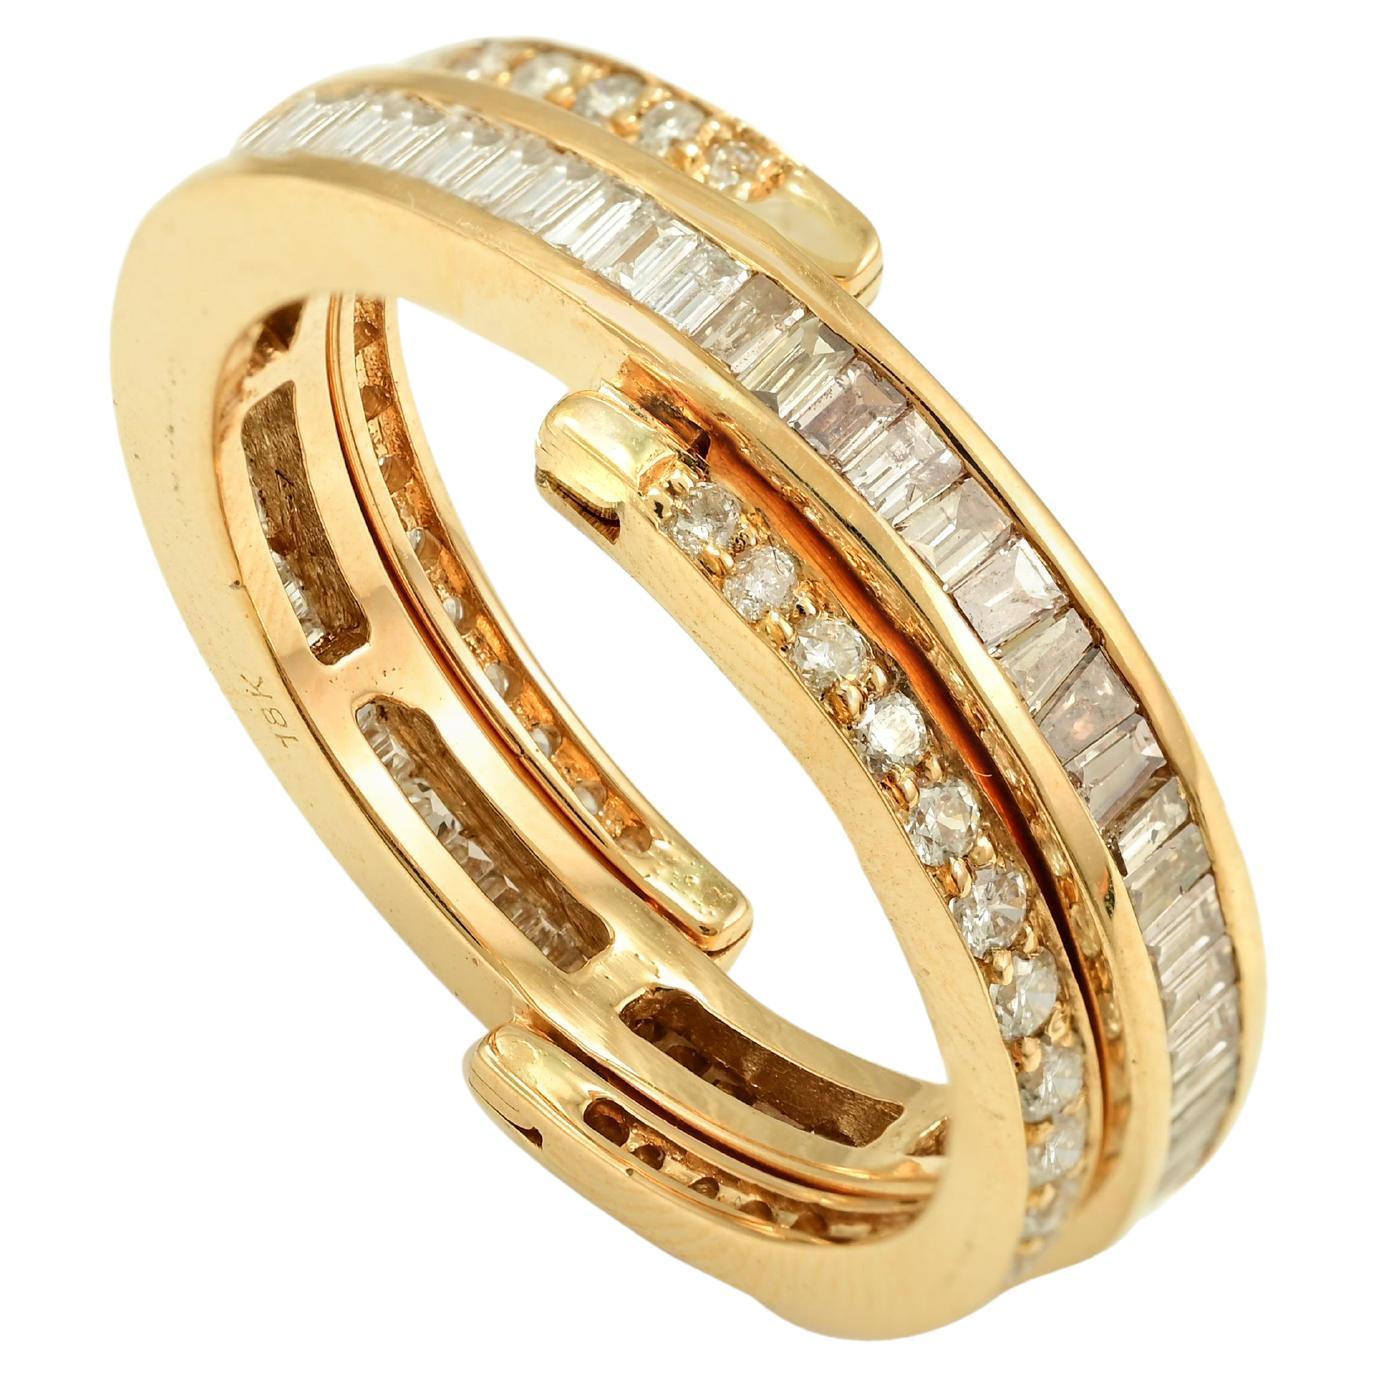 For Sale:  Solid 18k Yellow Gold Unique Channel Set Flip Over Diamond Engagement Band Ring